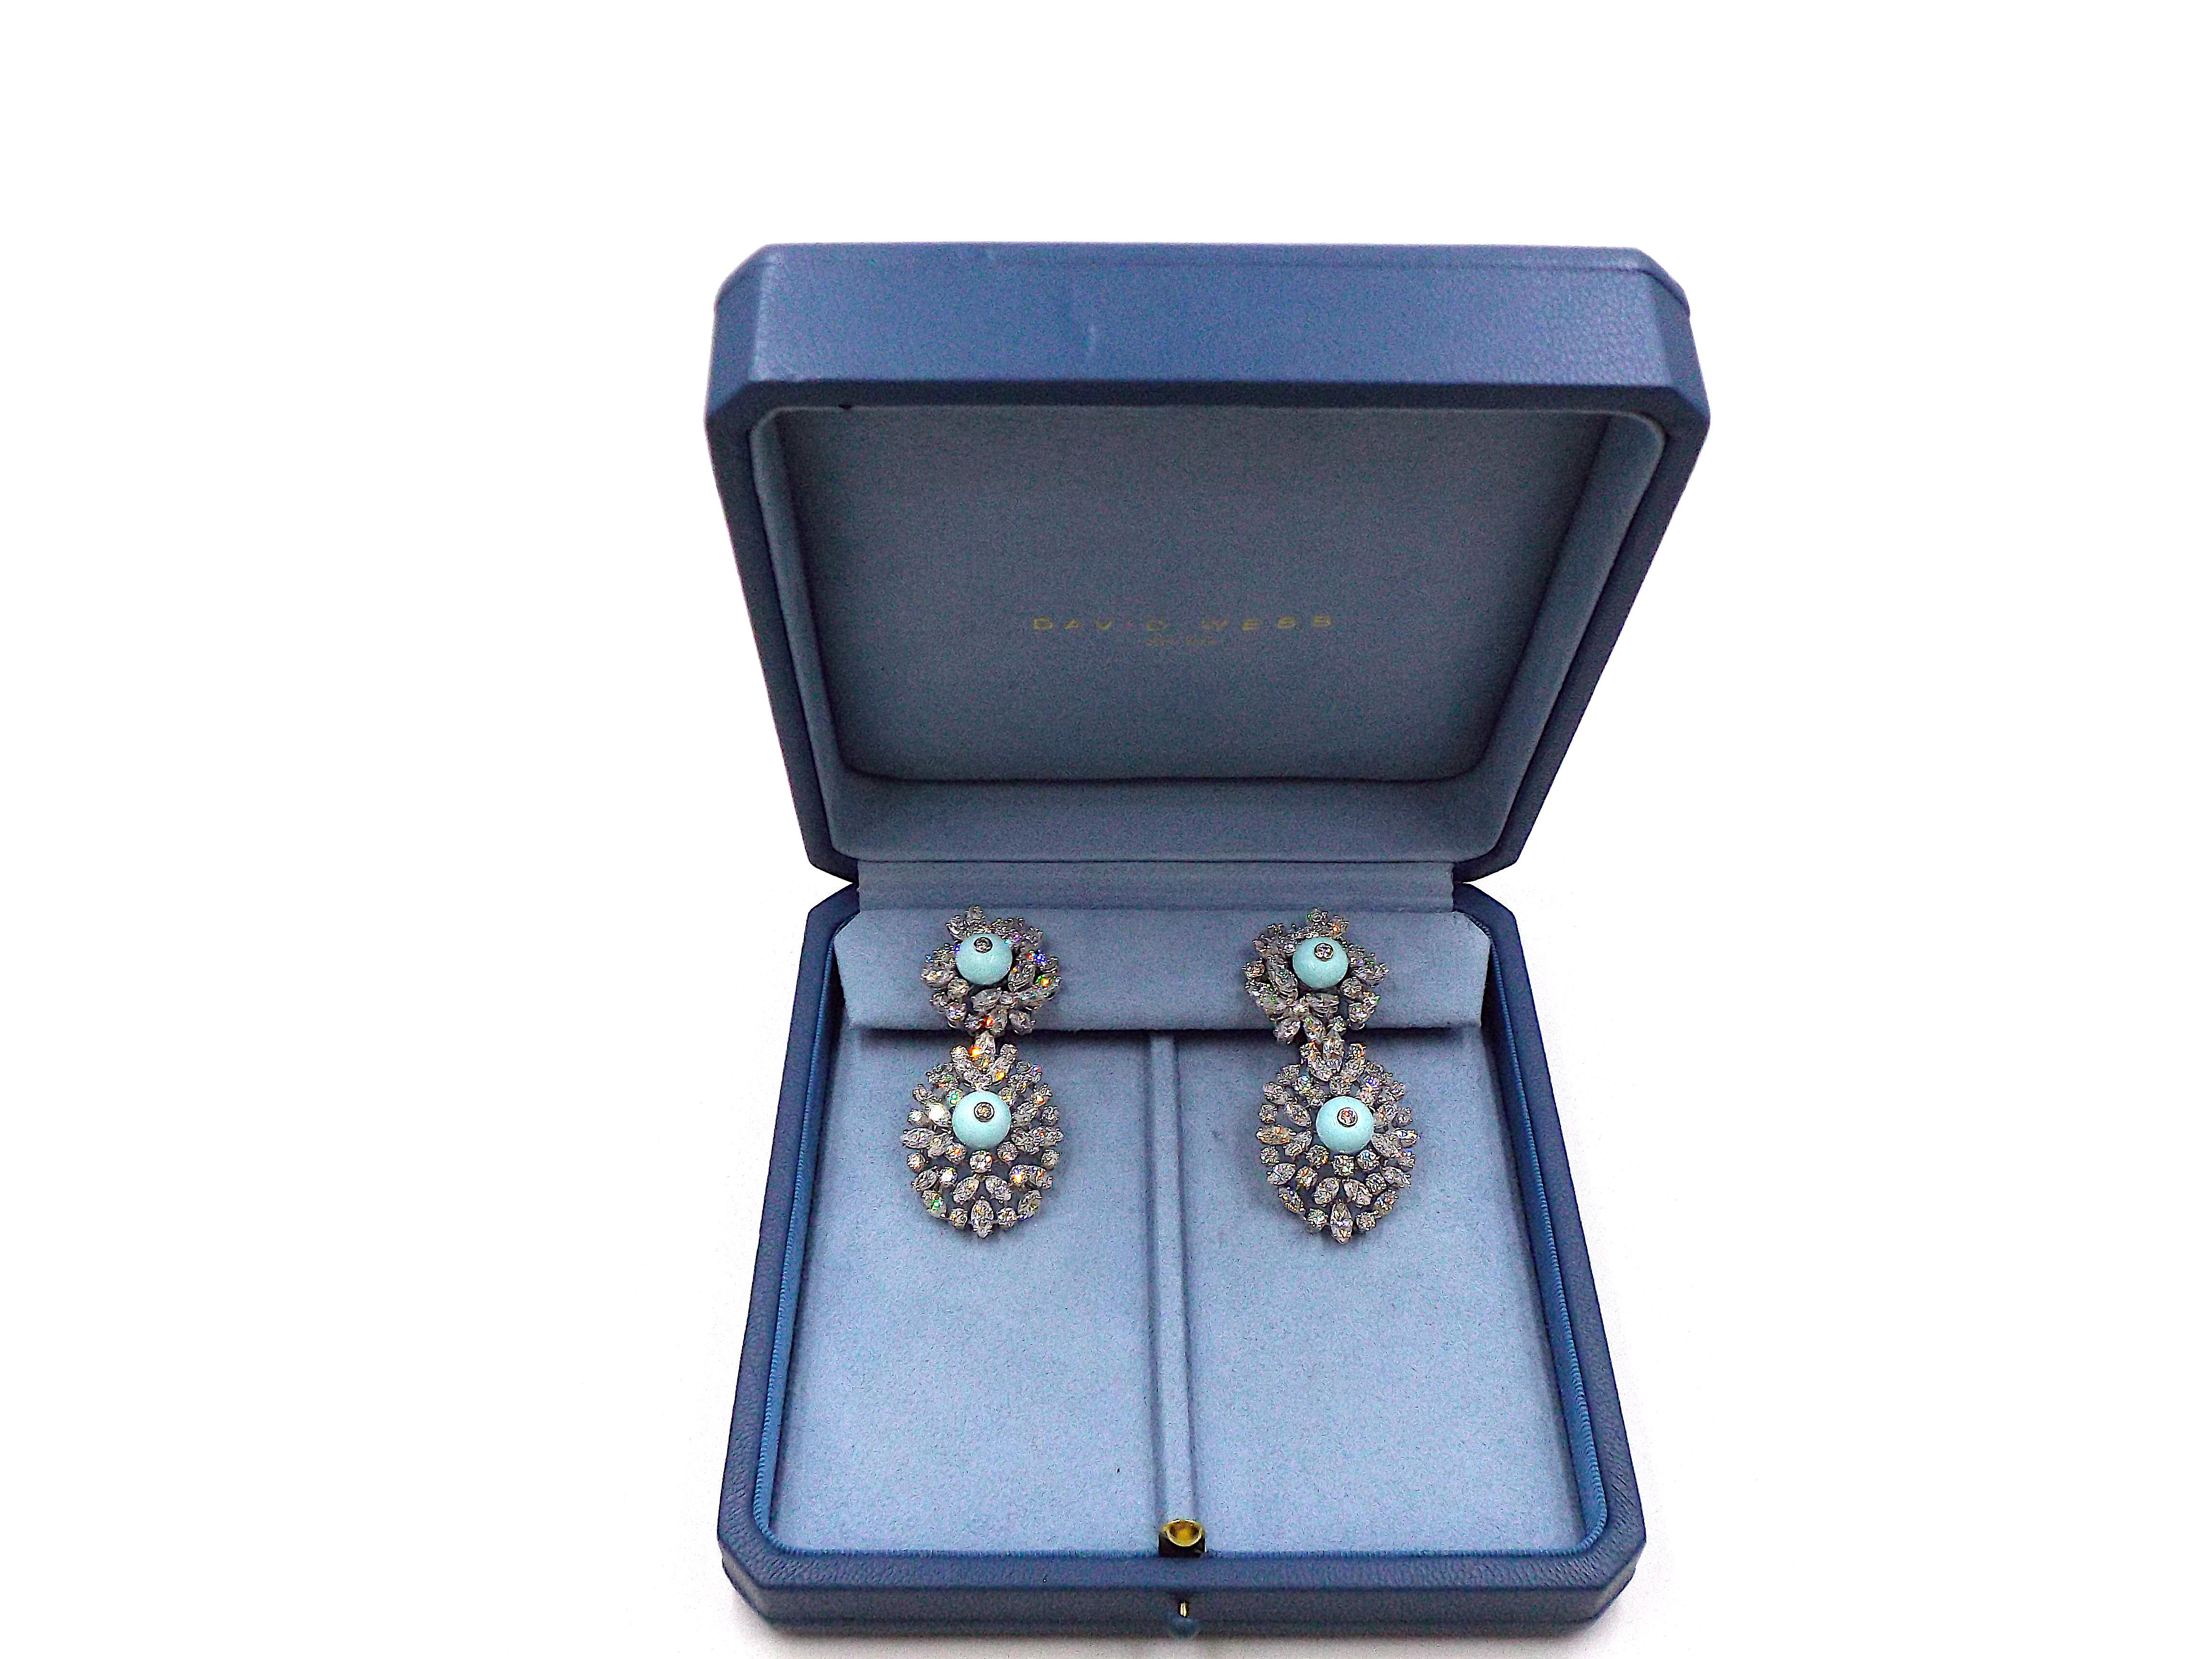 A pair of astonishing turquoise and diamond earrings by David Webb. Mount in 18K white gold and platinum, centering four cabochon turquoise stones surrounded by 124 diamonds weighing 27 carats. Each earring weighs 27.5 grams, dimensions 2.5